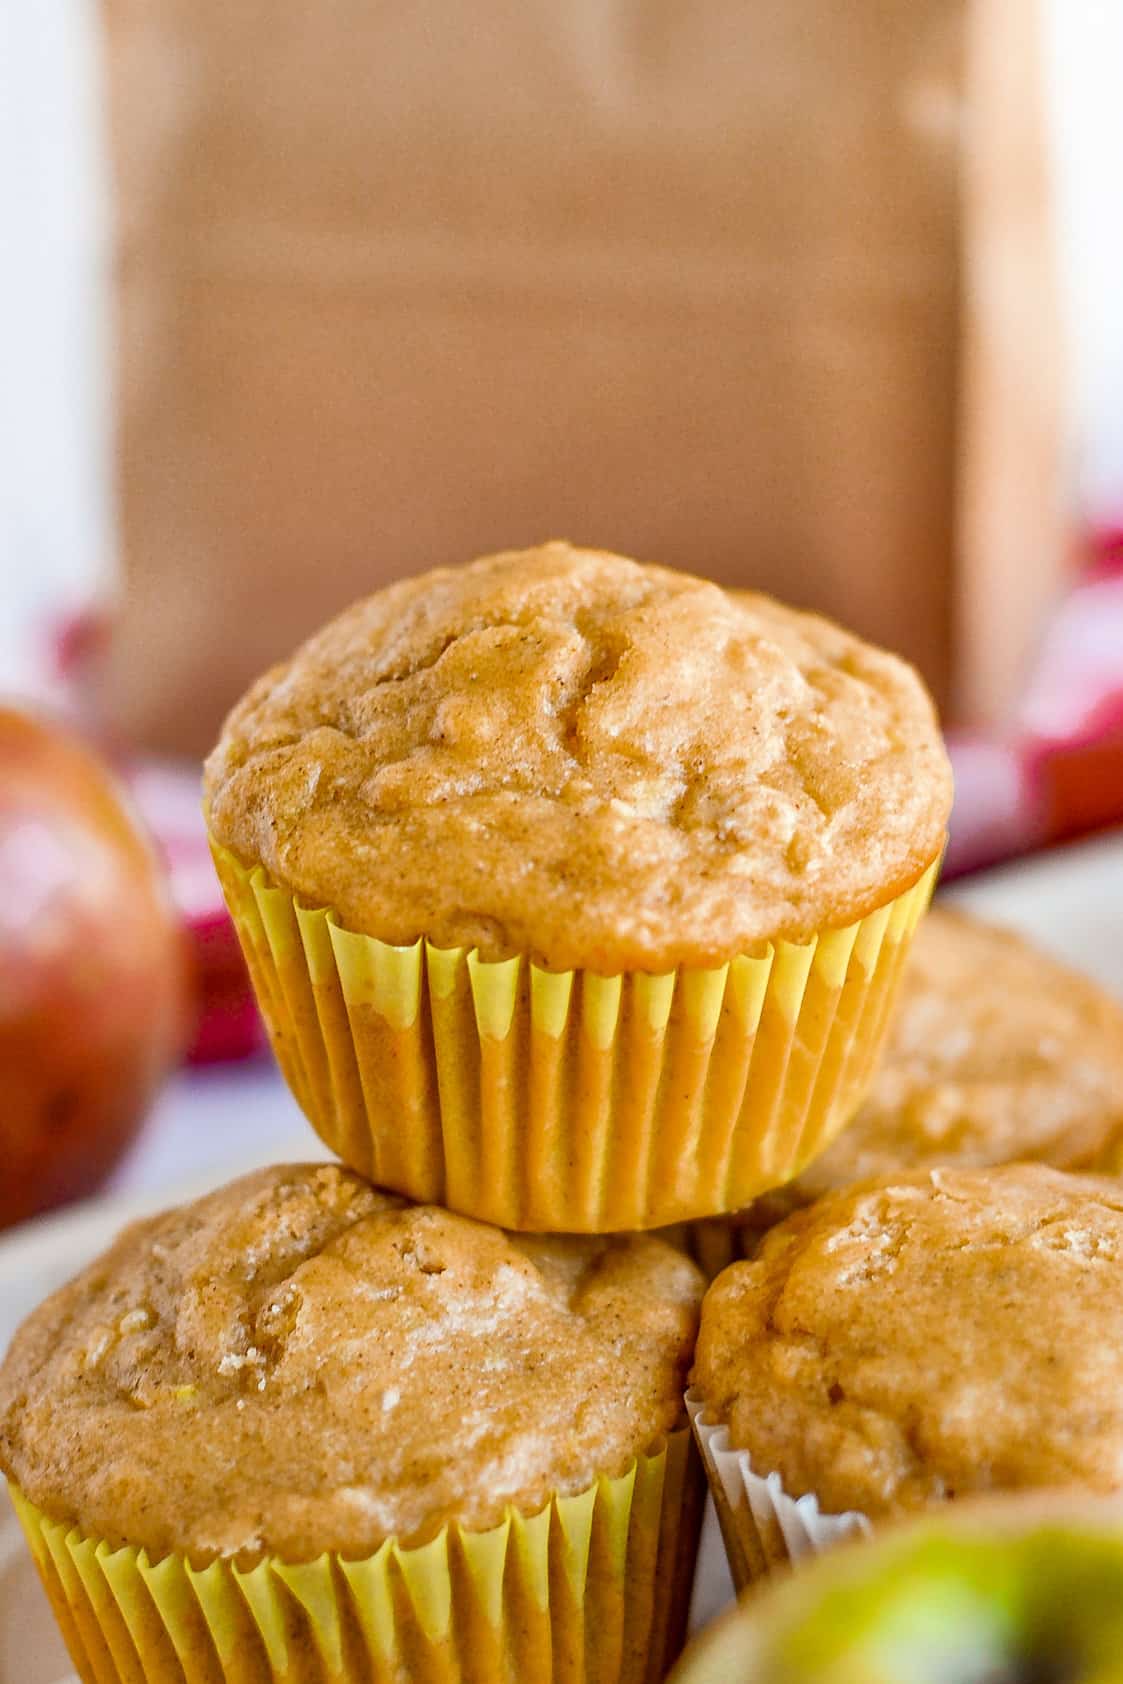 Apple oat muffins stacked in front of a brown paper lunch bag.